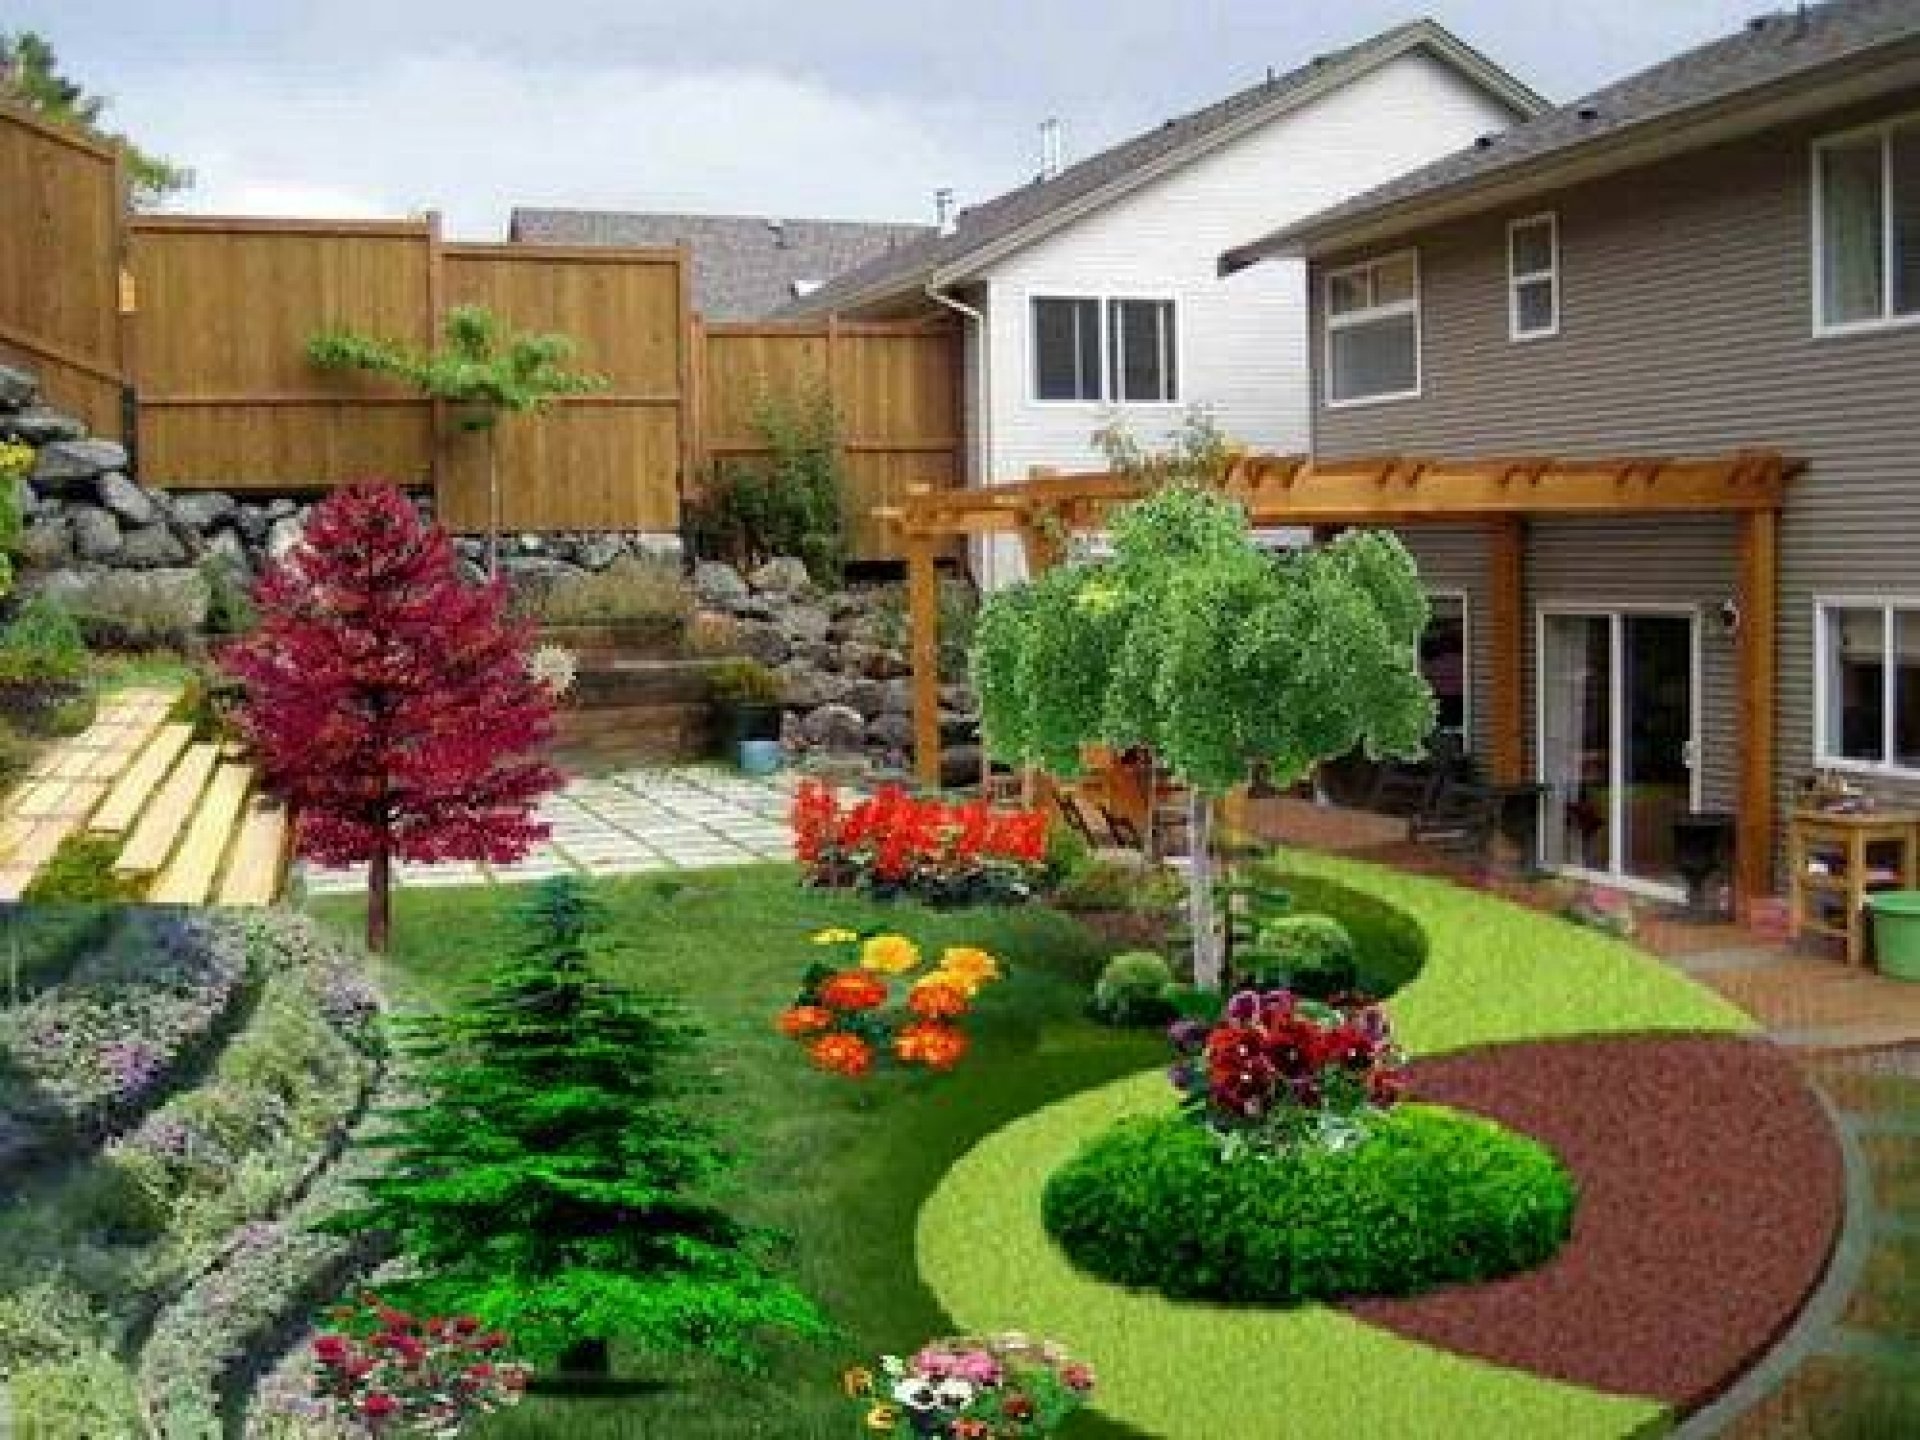 10 Attractive Landscaping Ideas For Small Areas 2023 - Bbeautiful LanDscaping Small BackyarD For Small Back YarD Along With 1